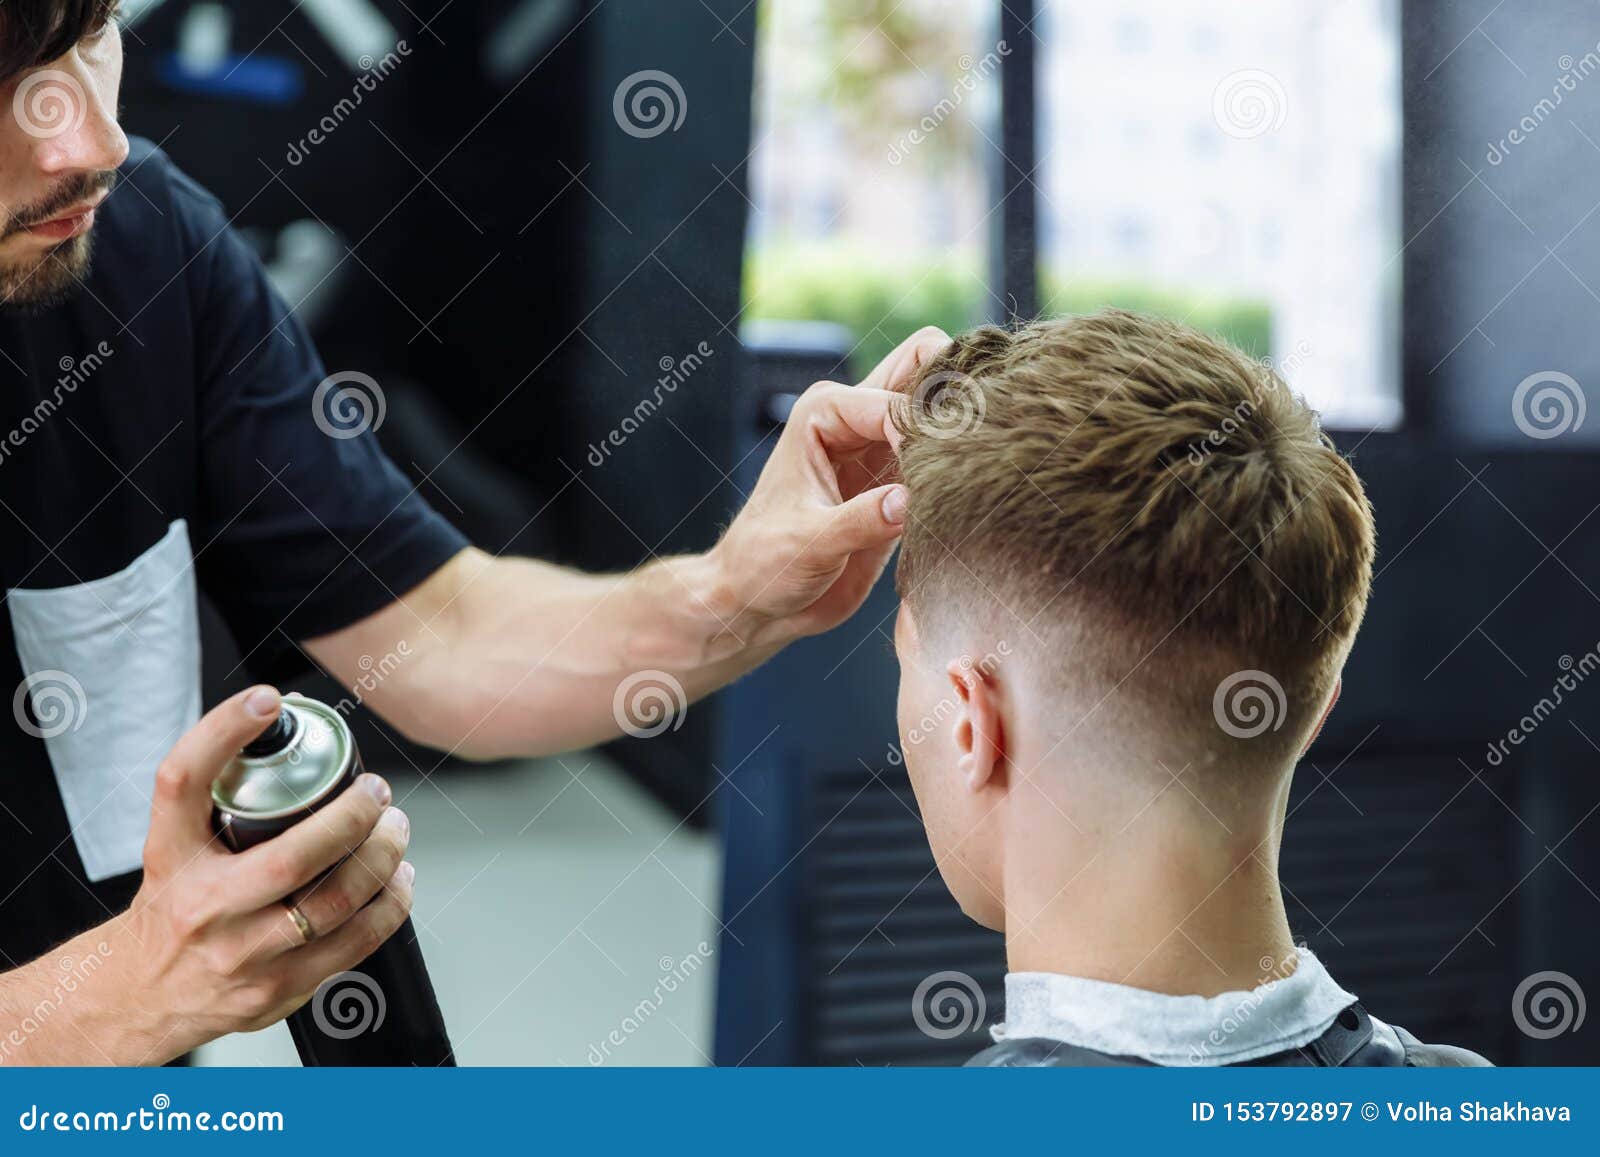 Barber Makes Hair Styling with Hair Spray after Haircut at the Barber Shop.  Young Handsome Caucasian Man Getting a Stock Image - Image of bangs, head:  153792897